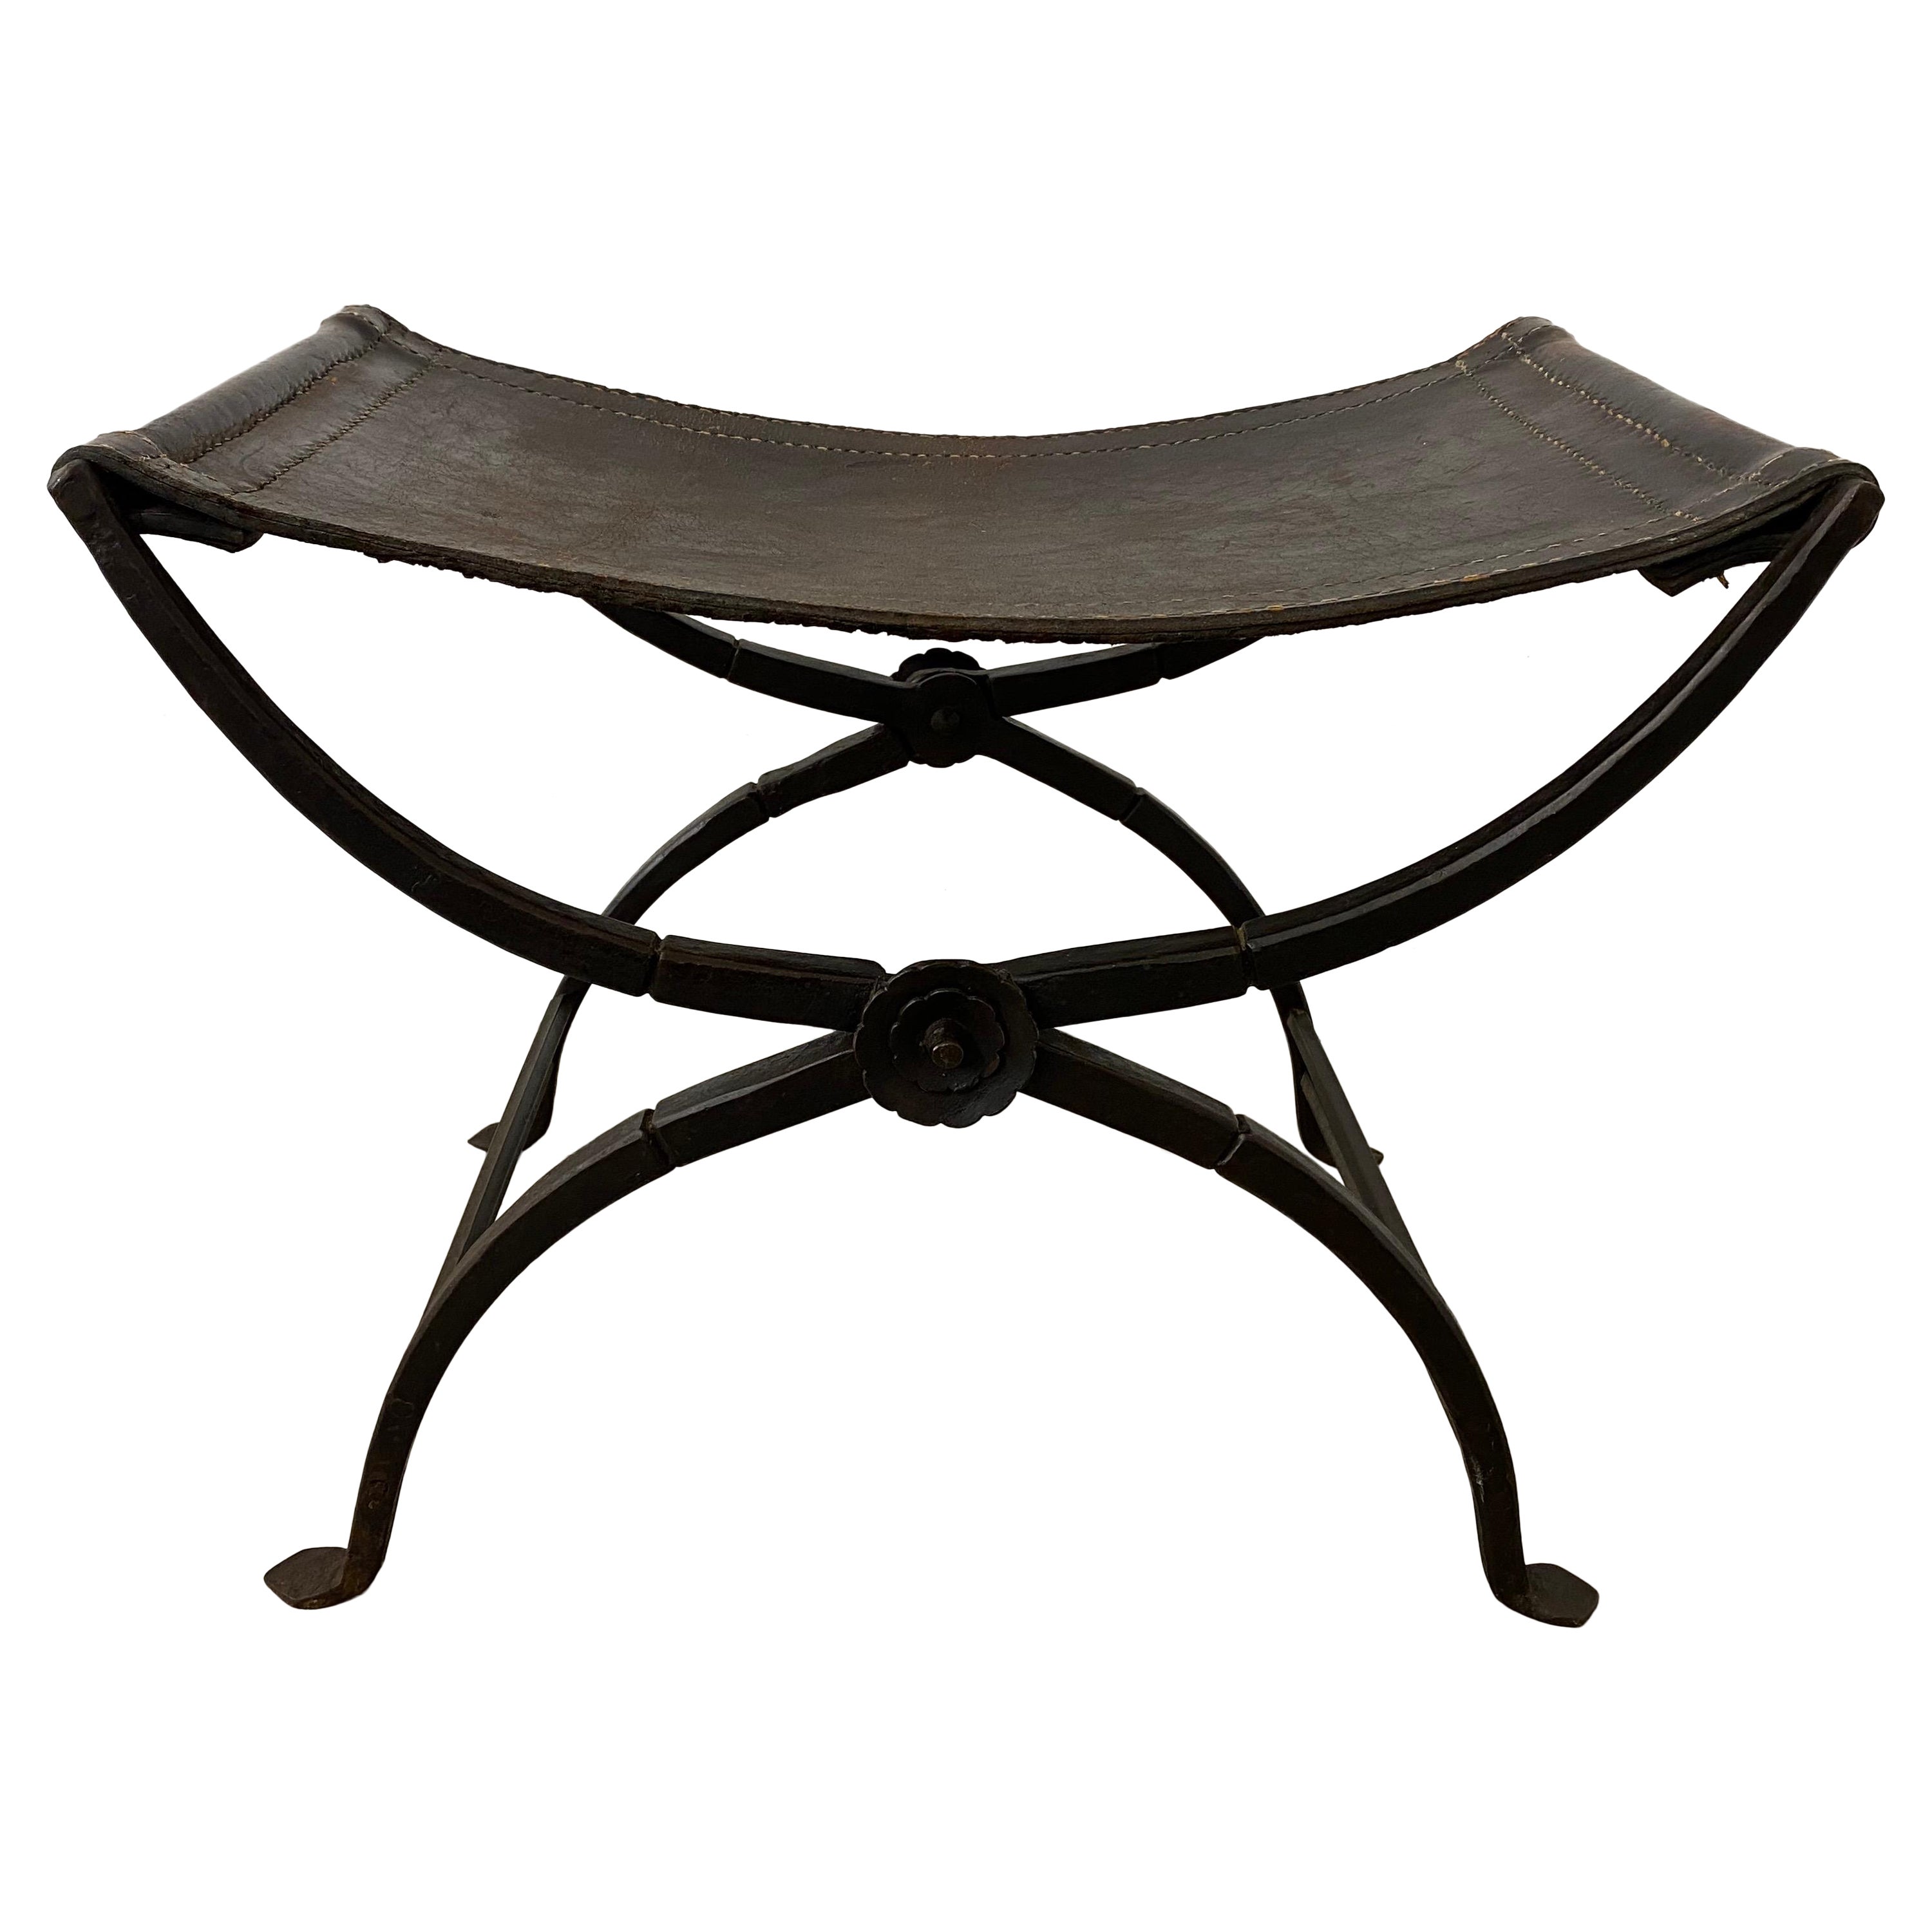 Chased Wrought Iron Folding Curule Bench